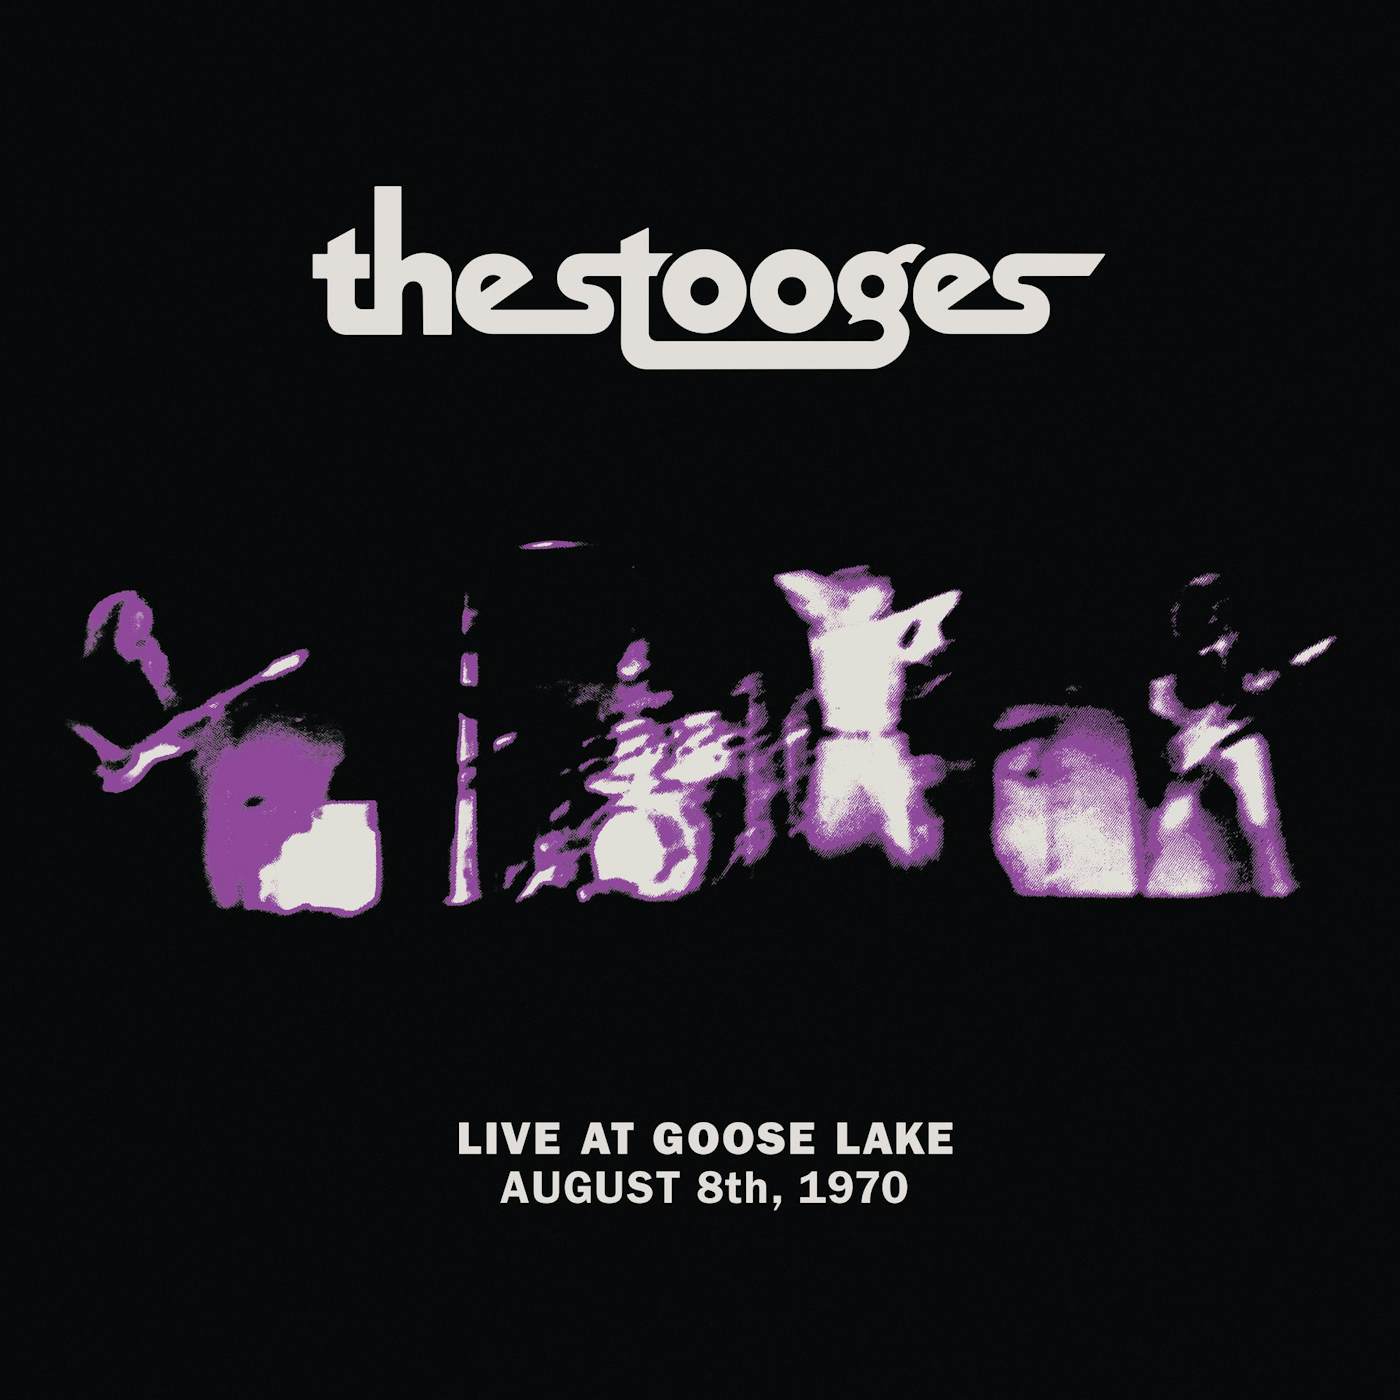 The Stooges LIVE AT GOOSE LAKE: AUGUST 8TH 1970 CD